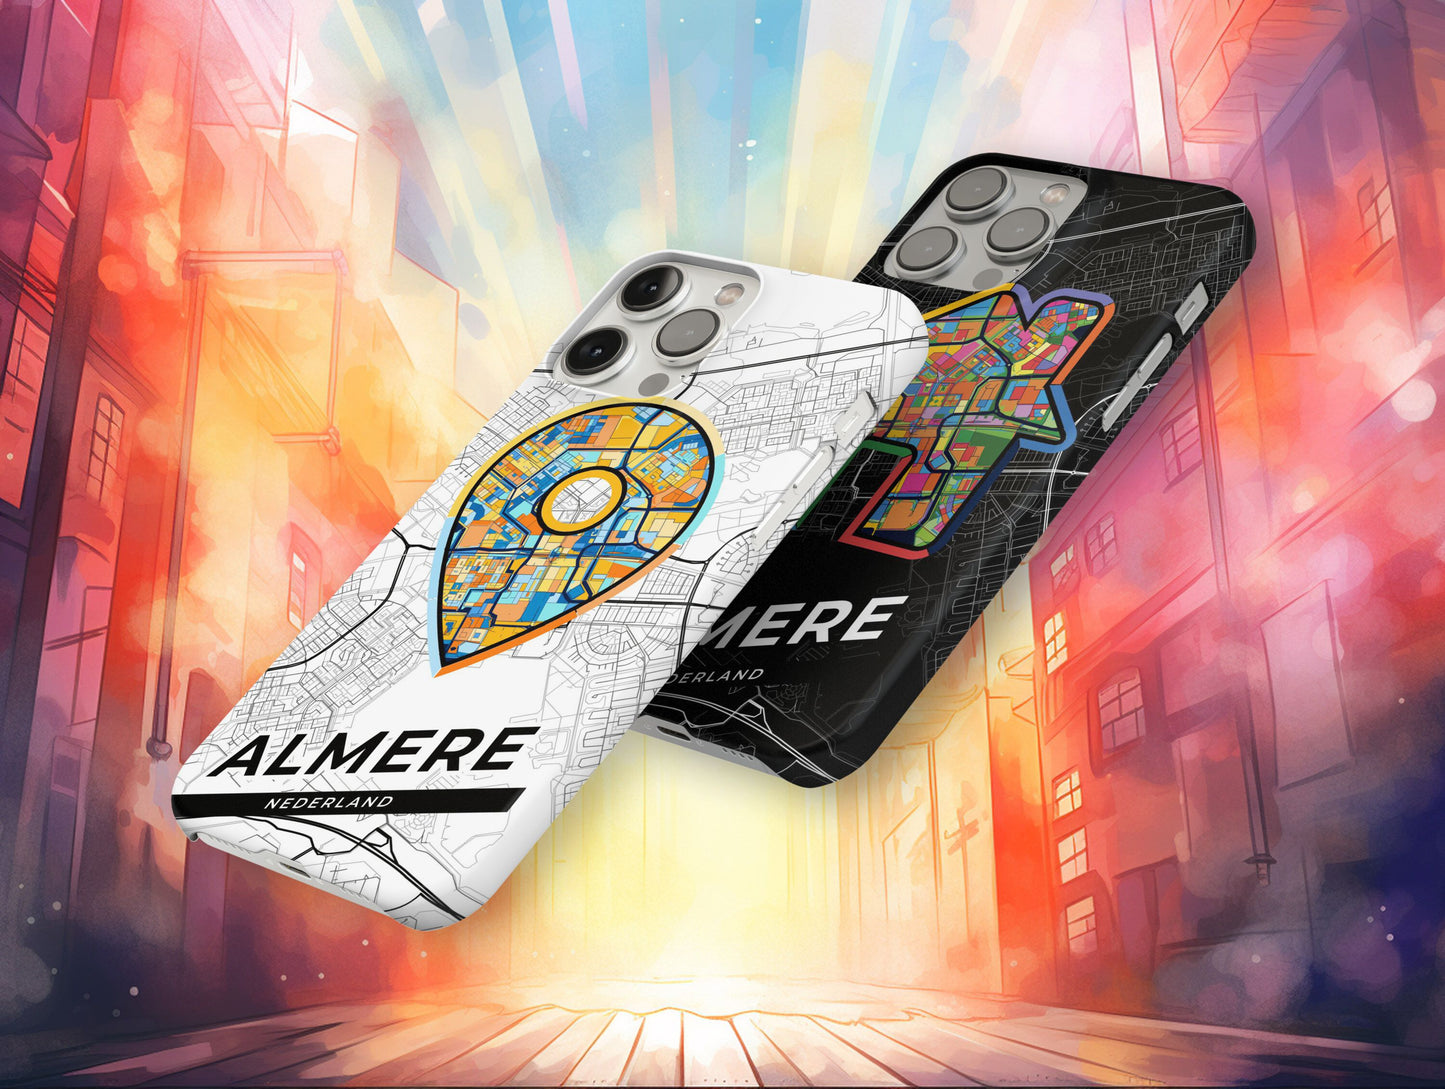 Almere Netherlands slim phone case with colorful icon. Birthday, wedding or housewarming gift. Couple match cases.